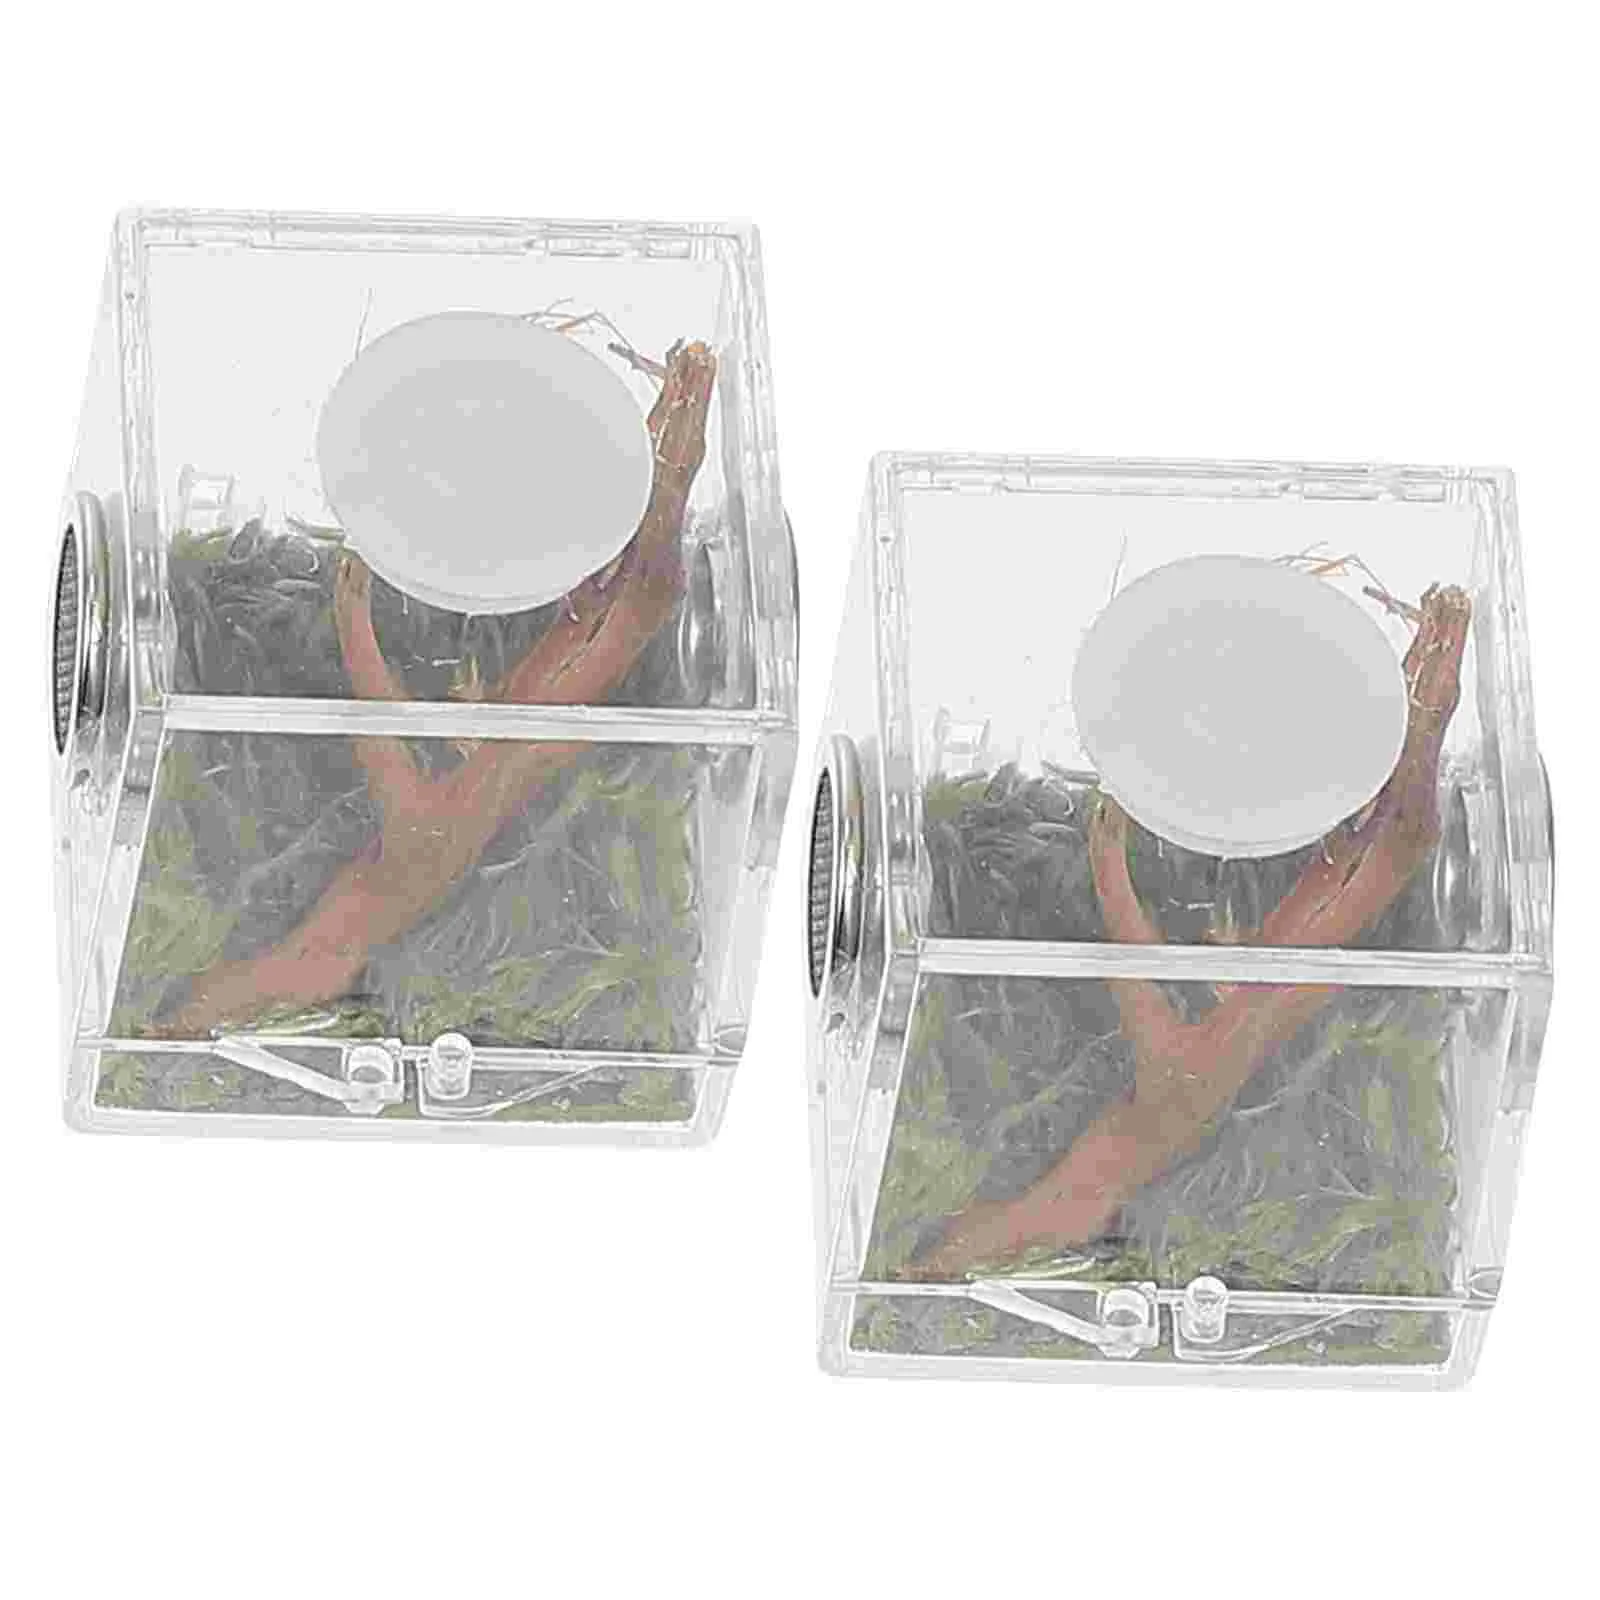 

2 Set Mini Animals Jumping Spider Breeding Box Insect Living Habitat House Cage Pet 3.5X3.5X4CM Acrylic Carrier